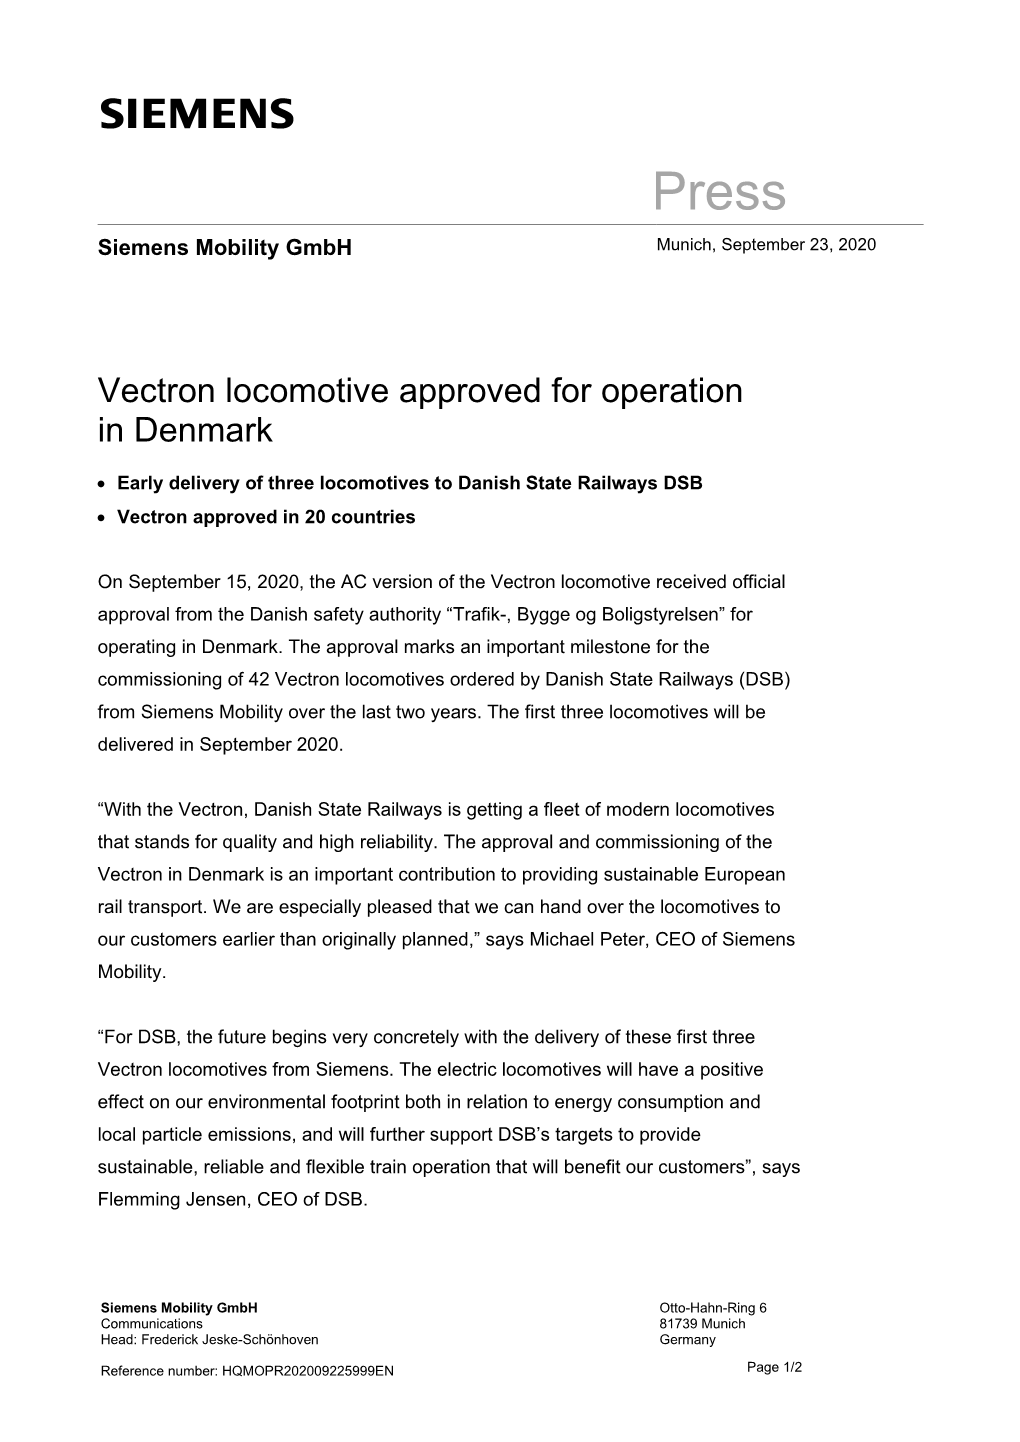 Vectron Locomotive Approved for Operation